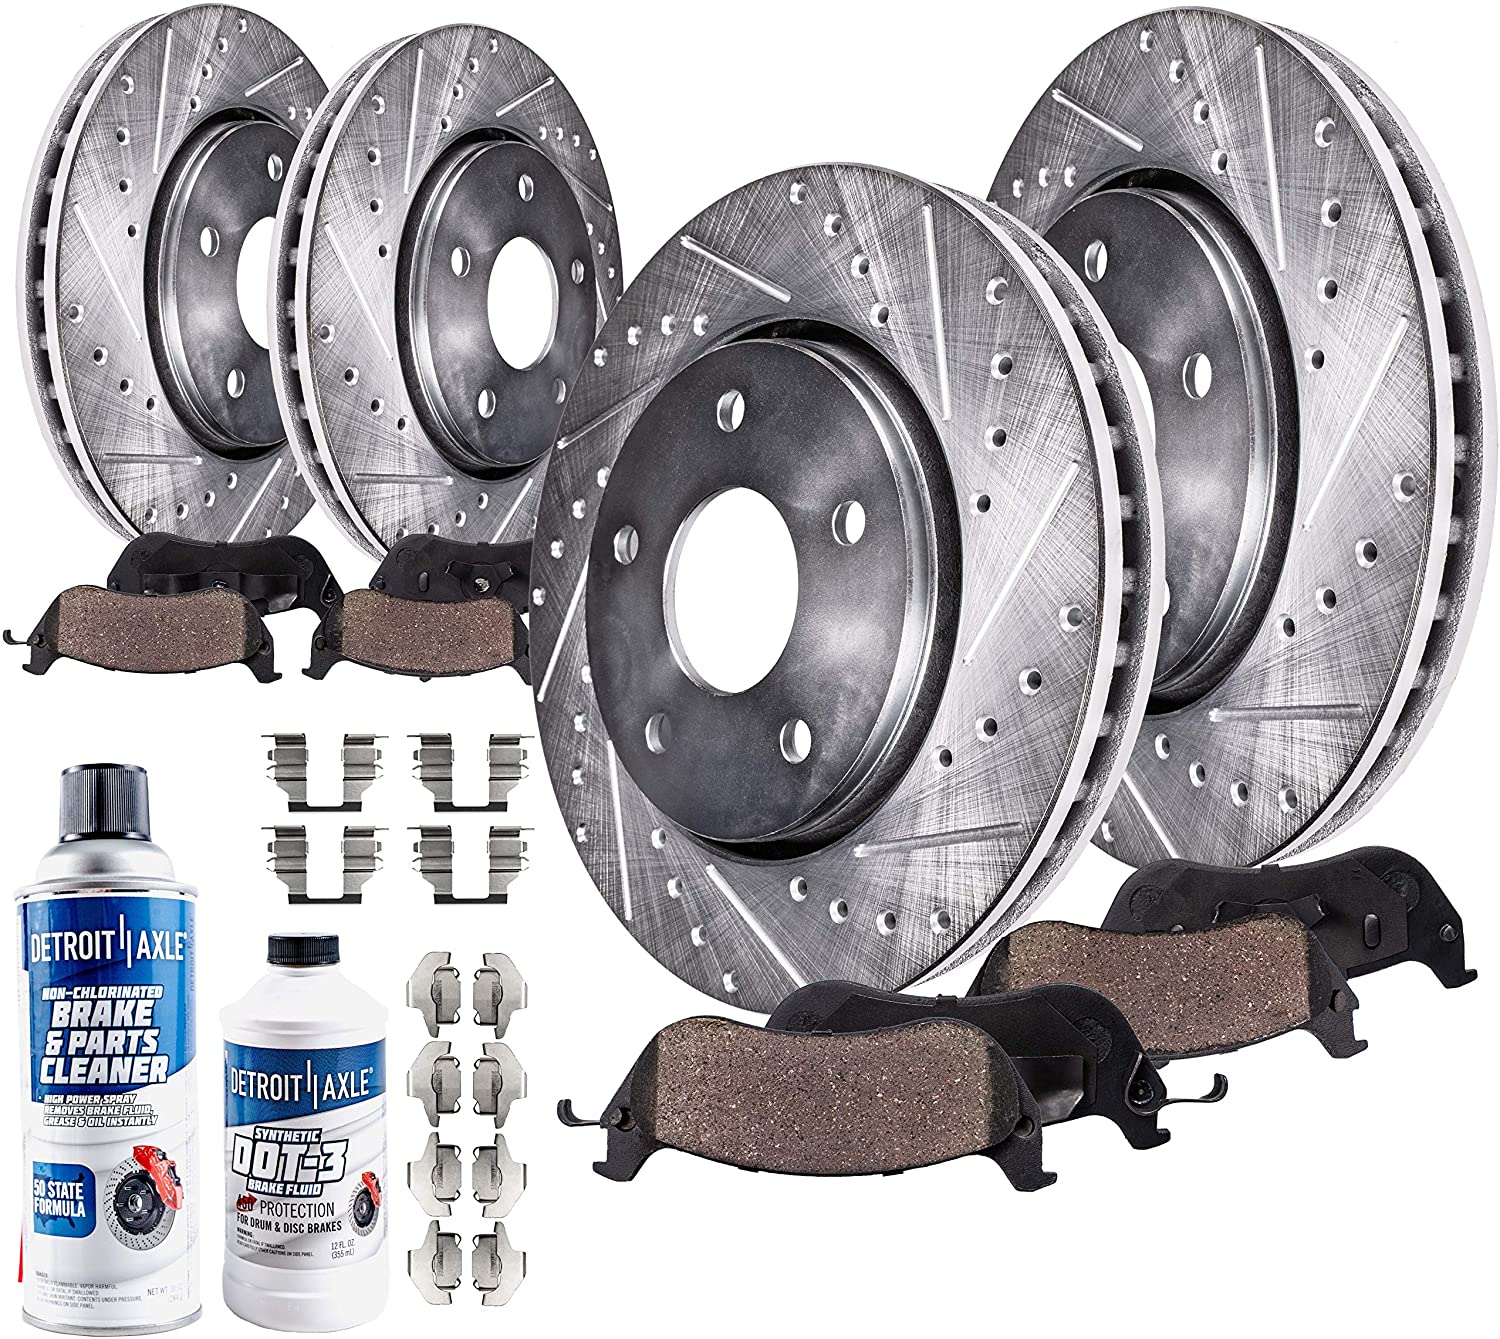 Detroit Axle - All (4) Front and Rear Drilled and Slotted Disc Brake Kit Rotors w/Ceramic Pads for 2008-18 Toyota Sequoia - [2007-17 Tundra] - 2016-18 Land Cruiser - [2017-18 Lexus LX570]